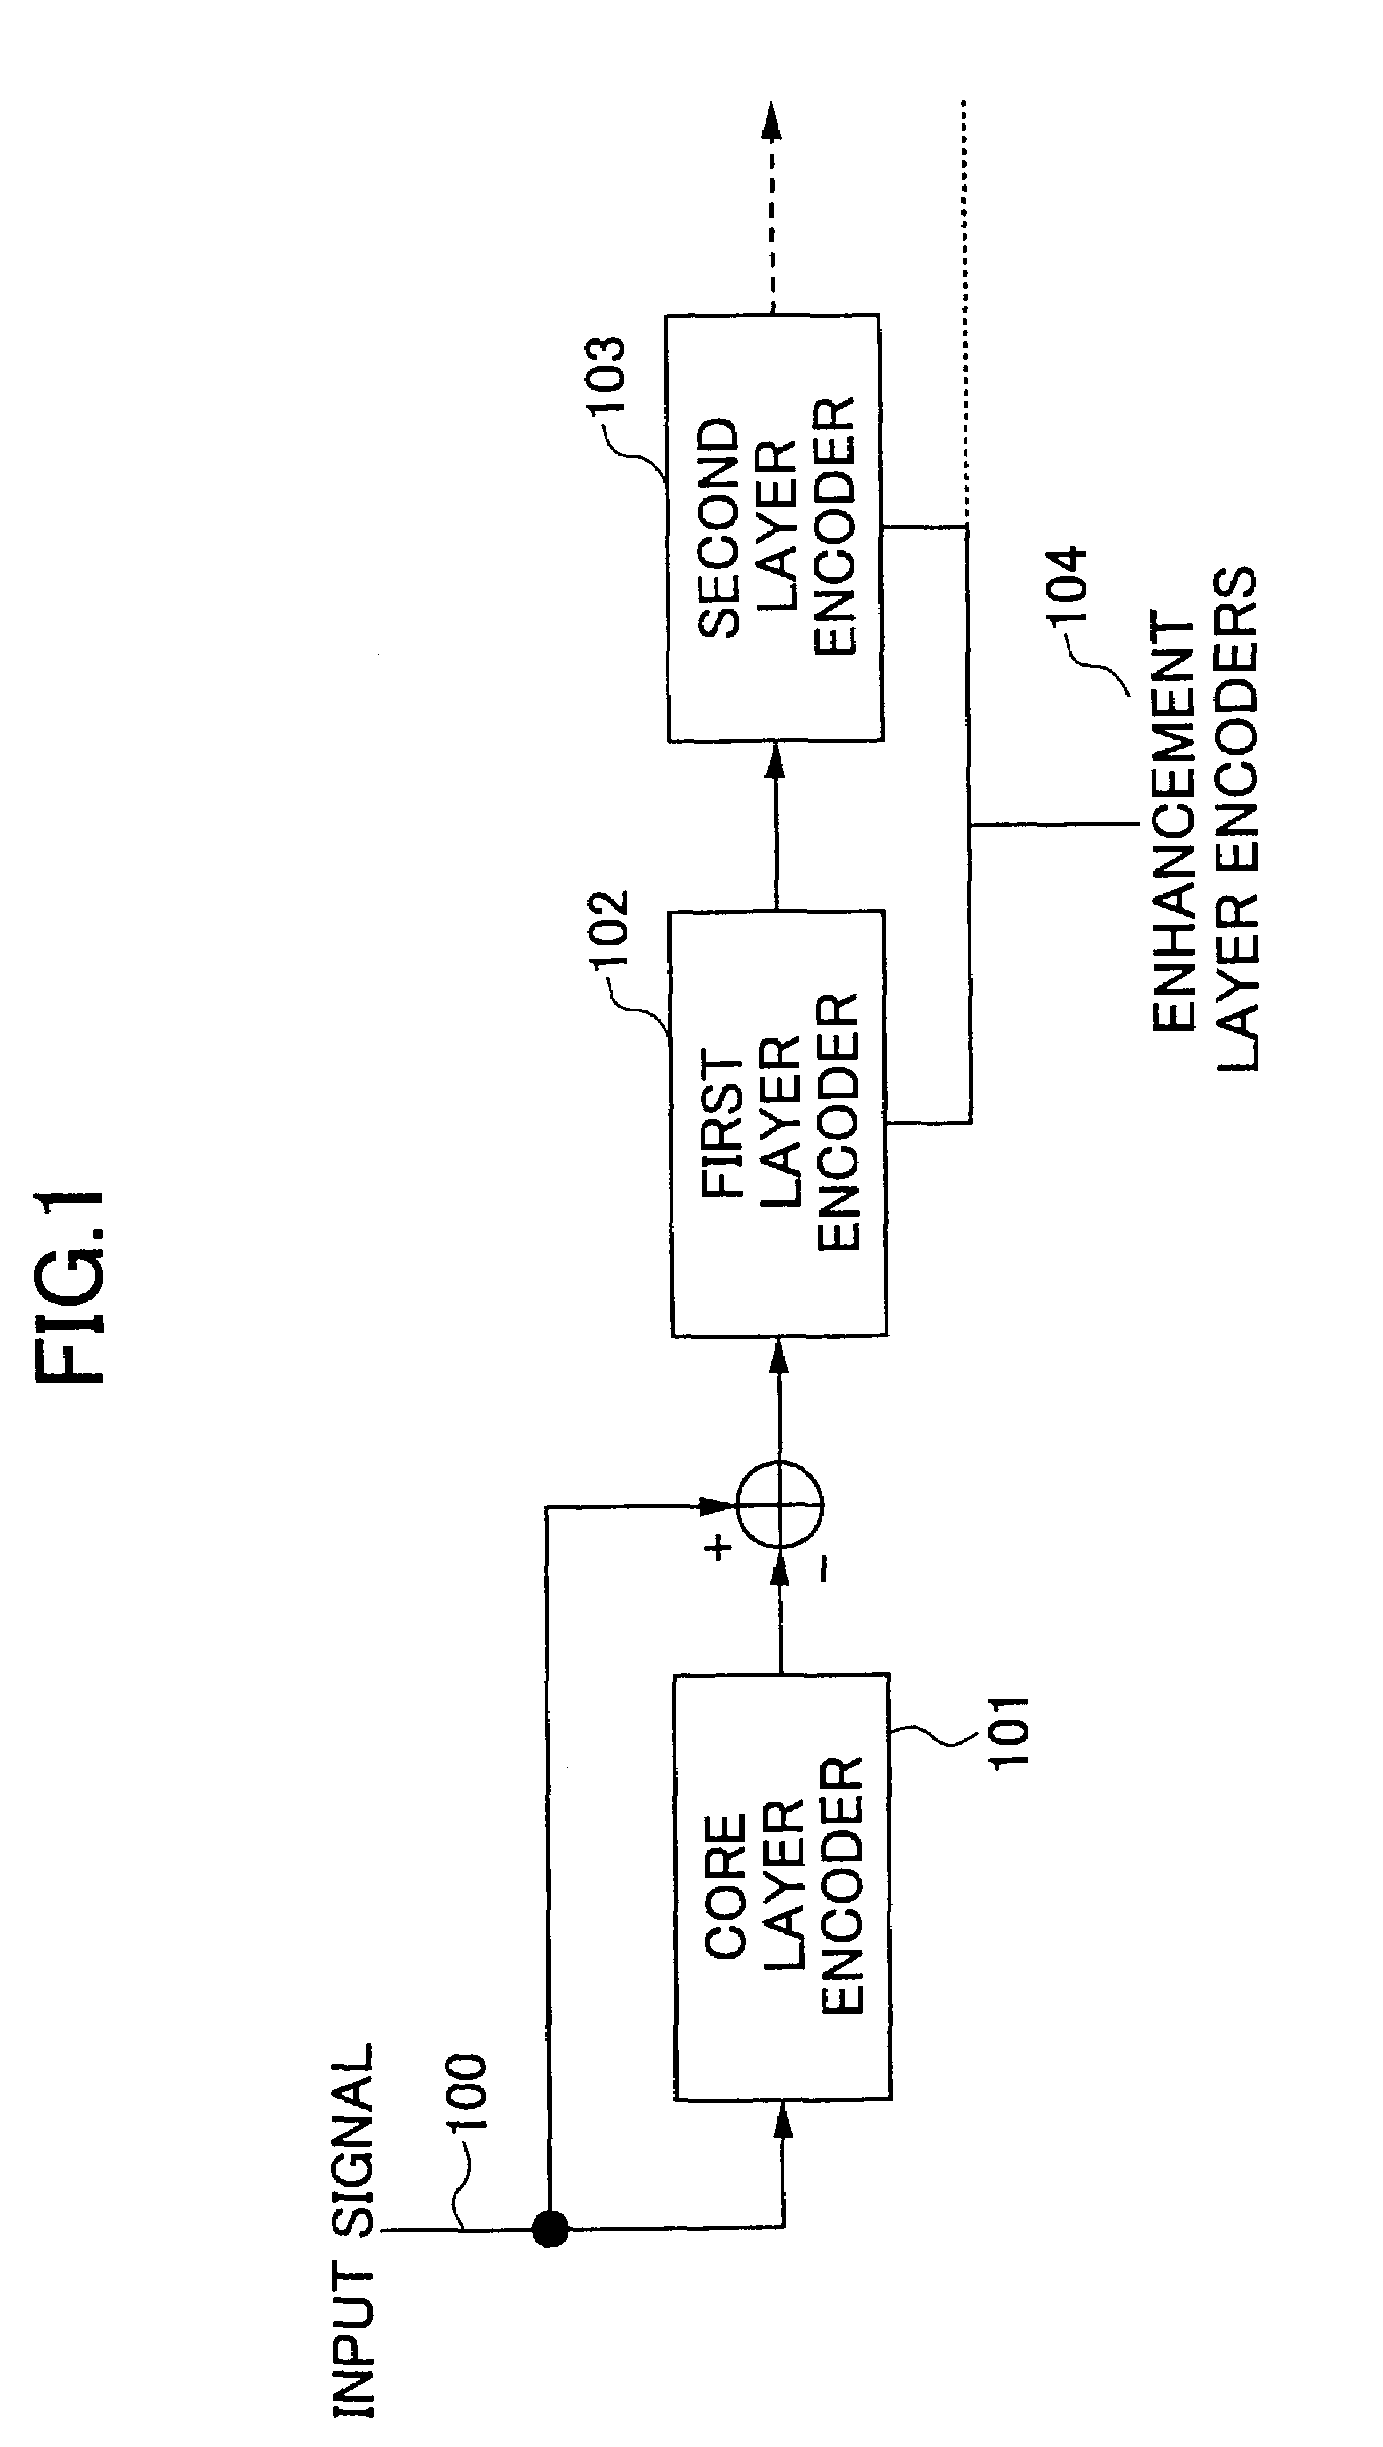 Encoding and decoding method and apparatus using rising-transition detection and notification